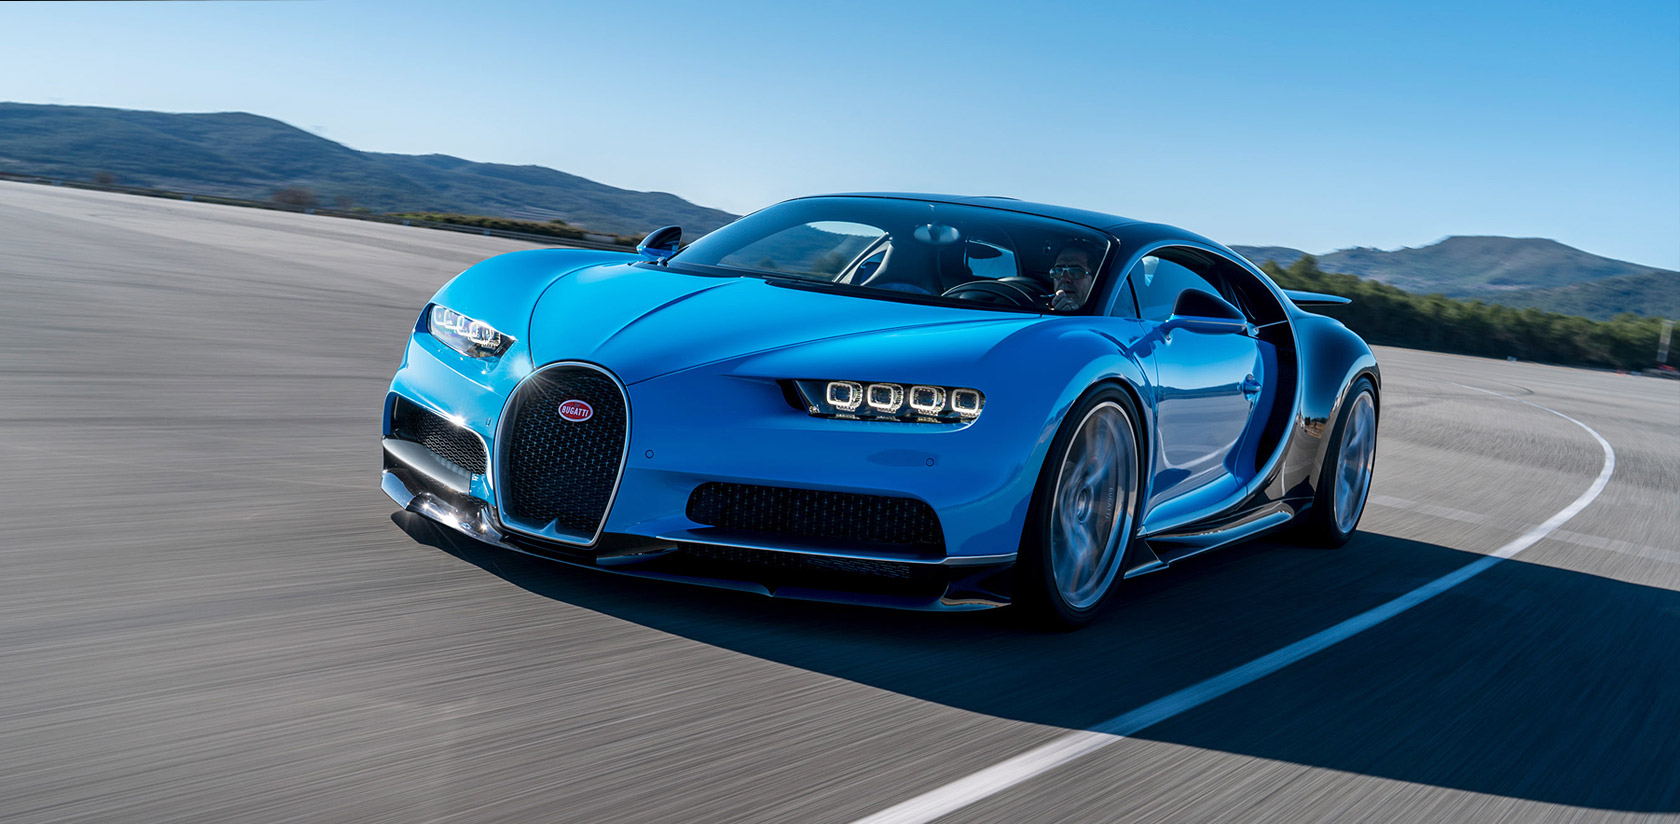 Bugatti Chiron: Who the hell was Louis Chiron and why is his name on a car?  - Carfection 